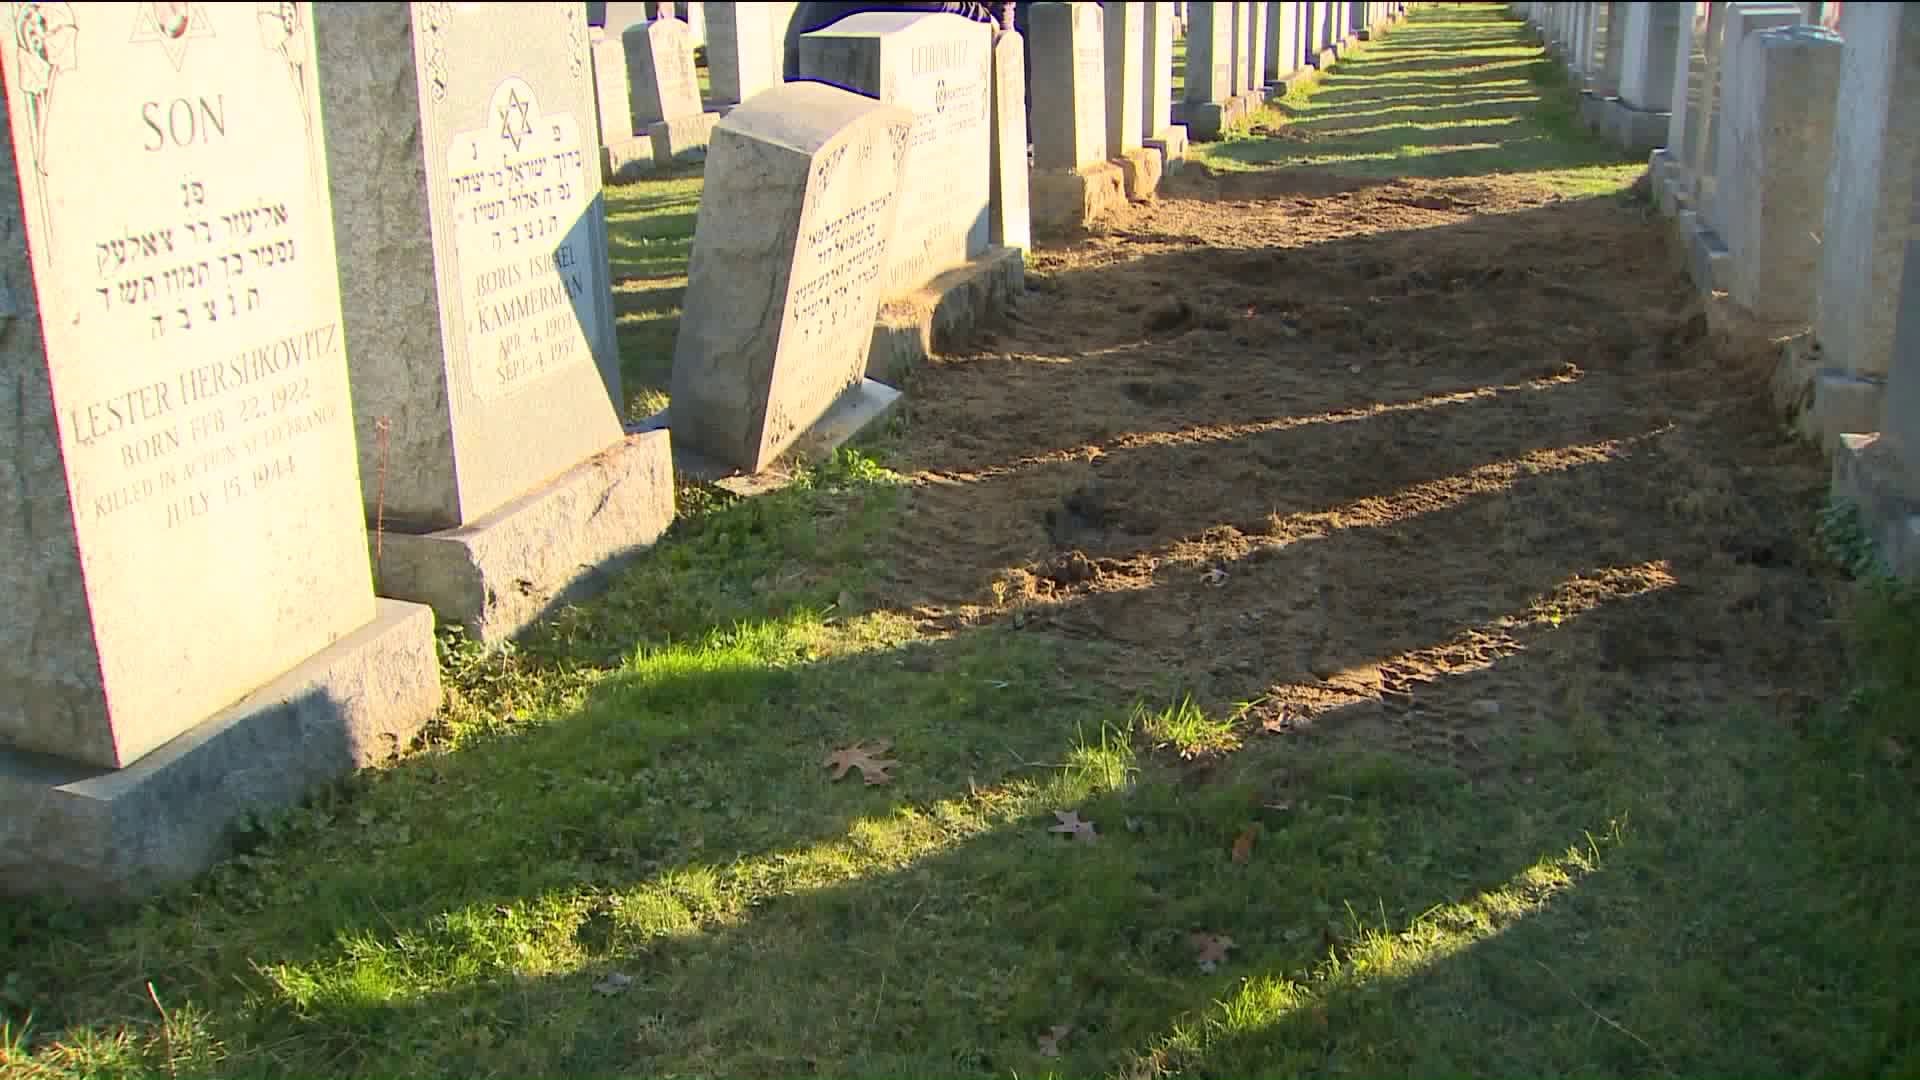 Remains appear removed from grave in Hartford cemetery